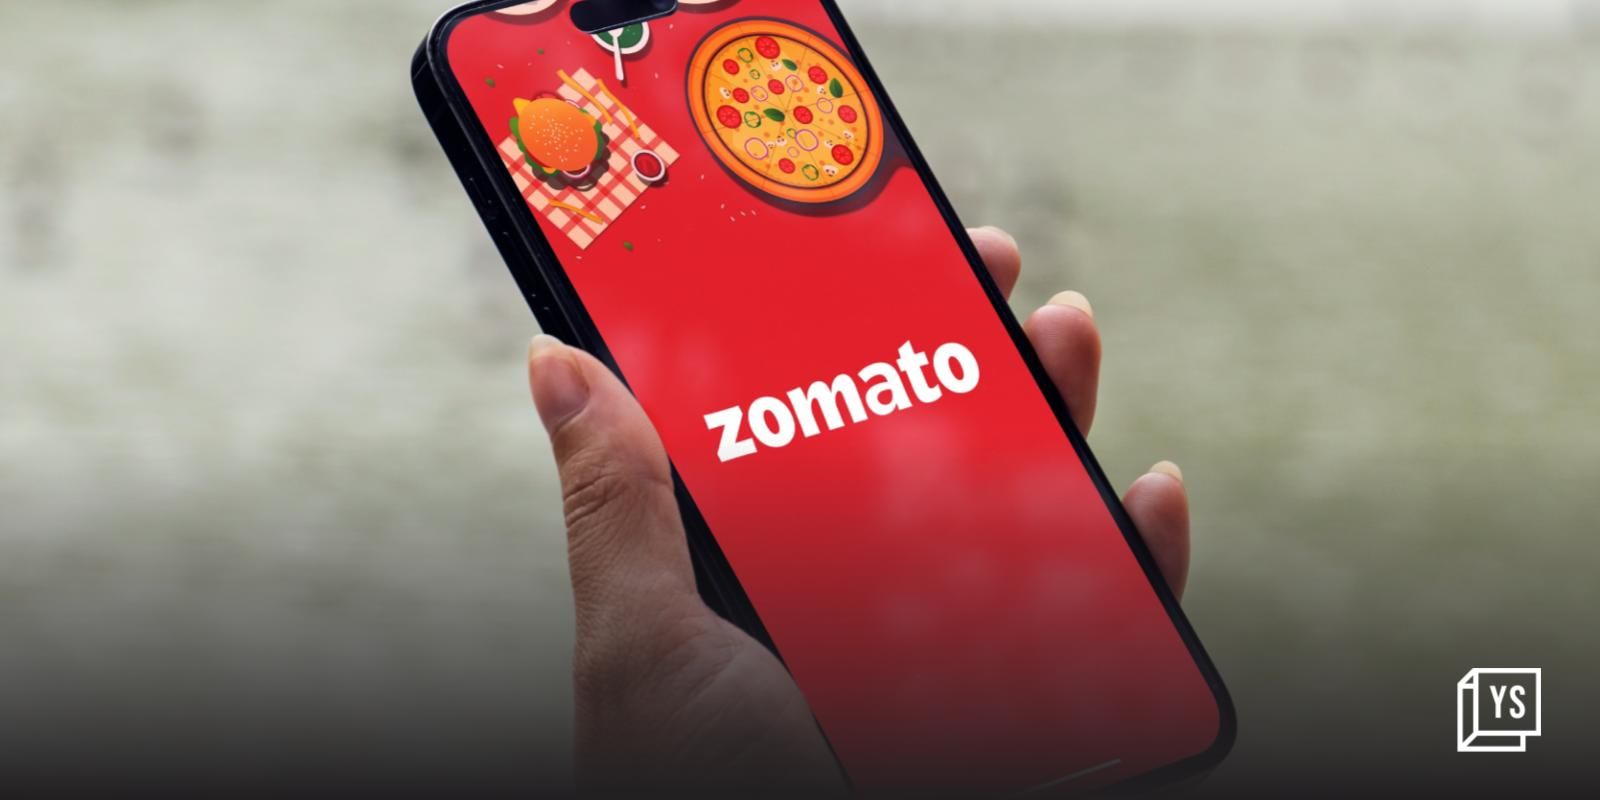 Zomato rebrands 10-minute food delivery service; says Gold programme has 9 lakh+ signups